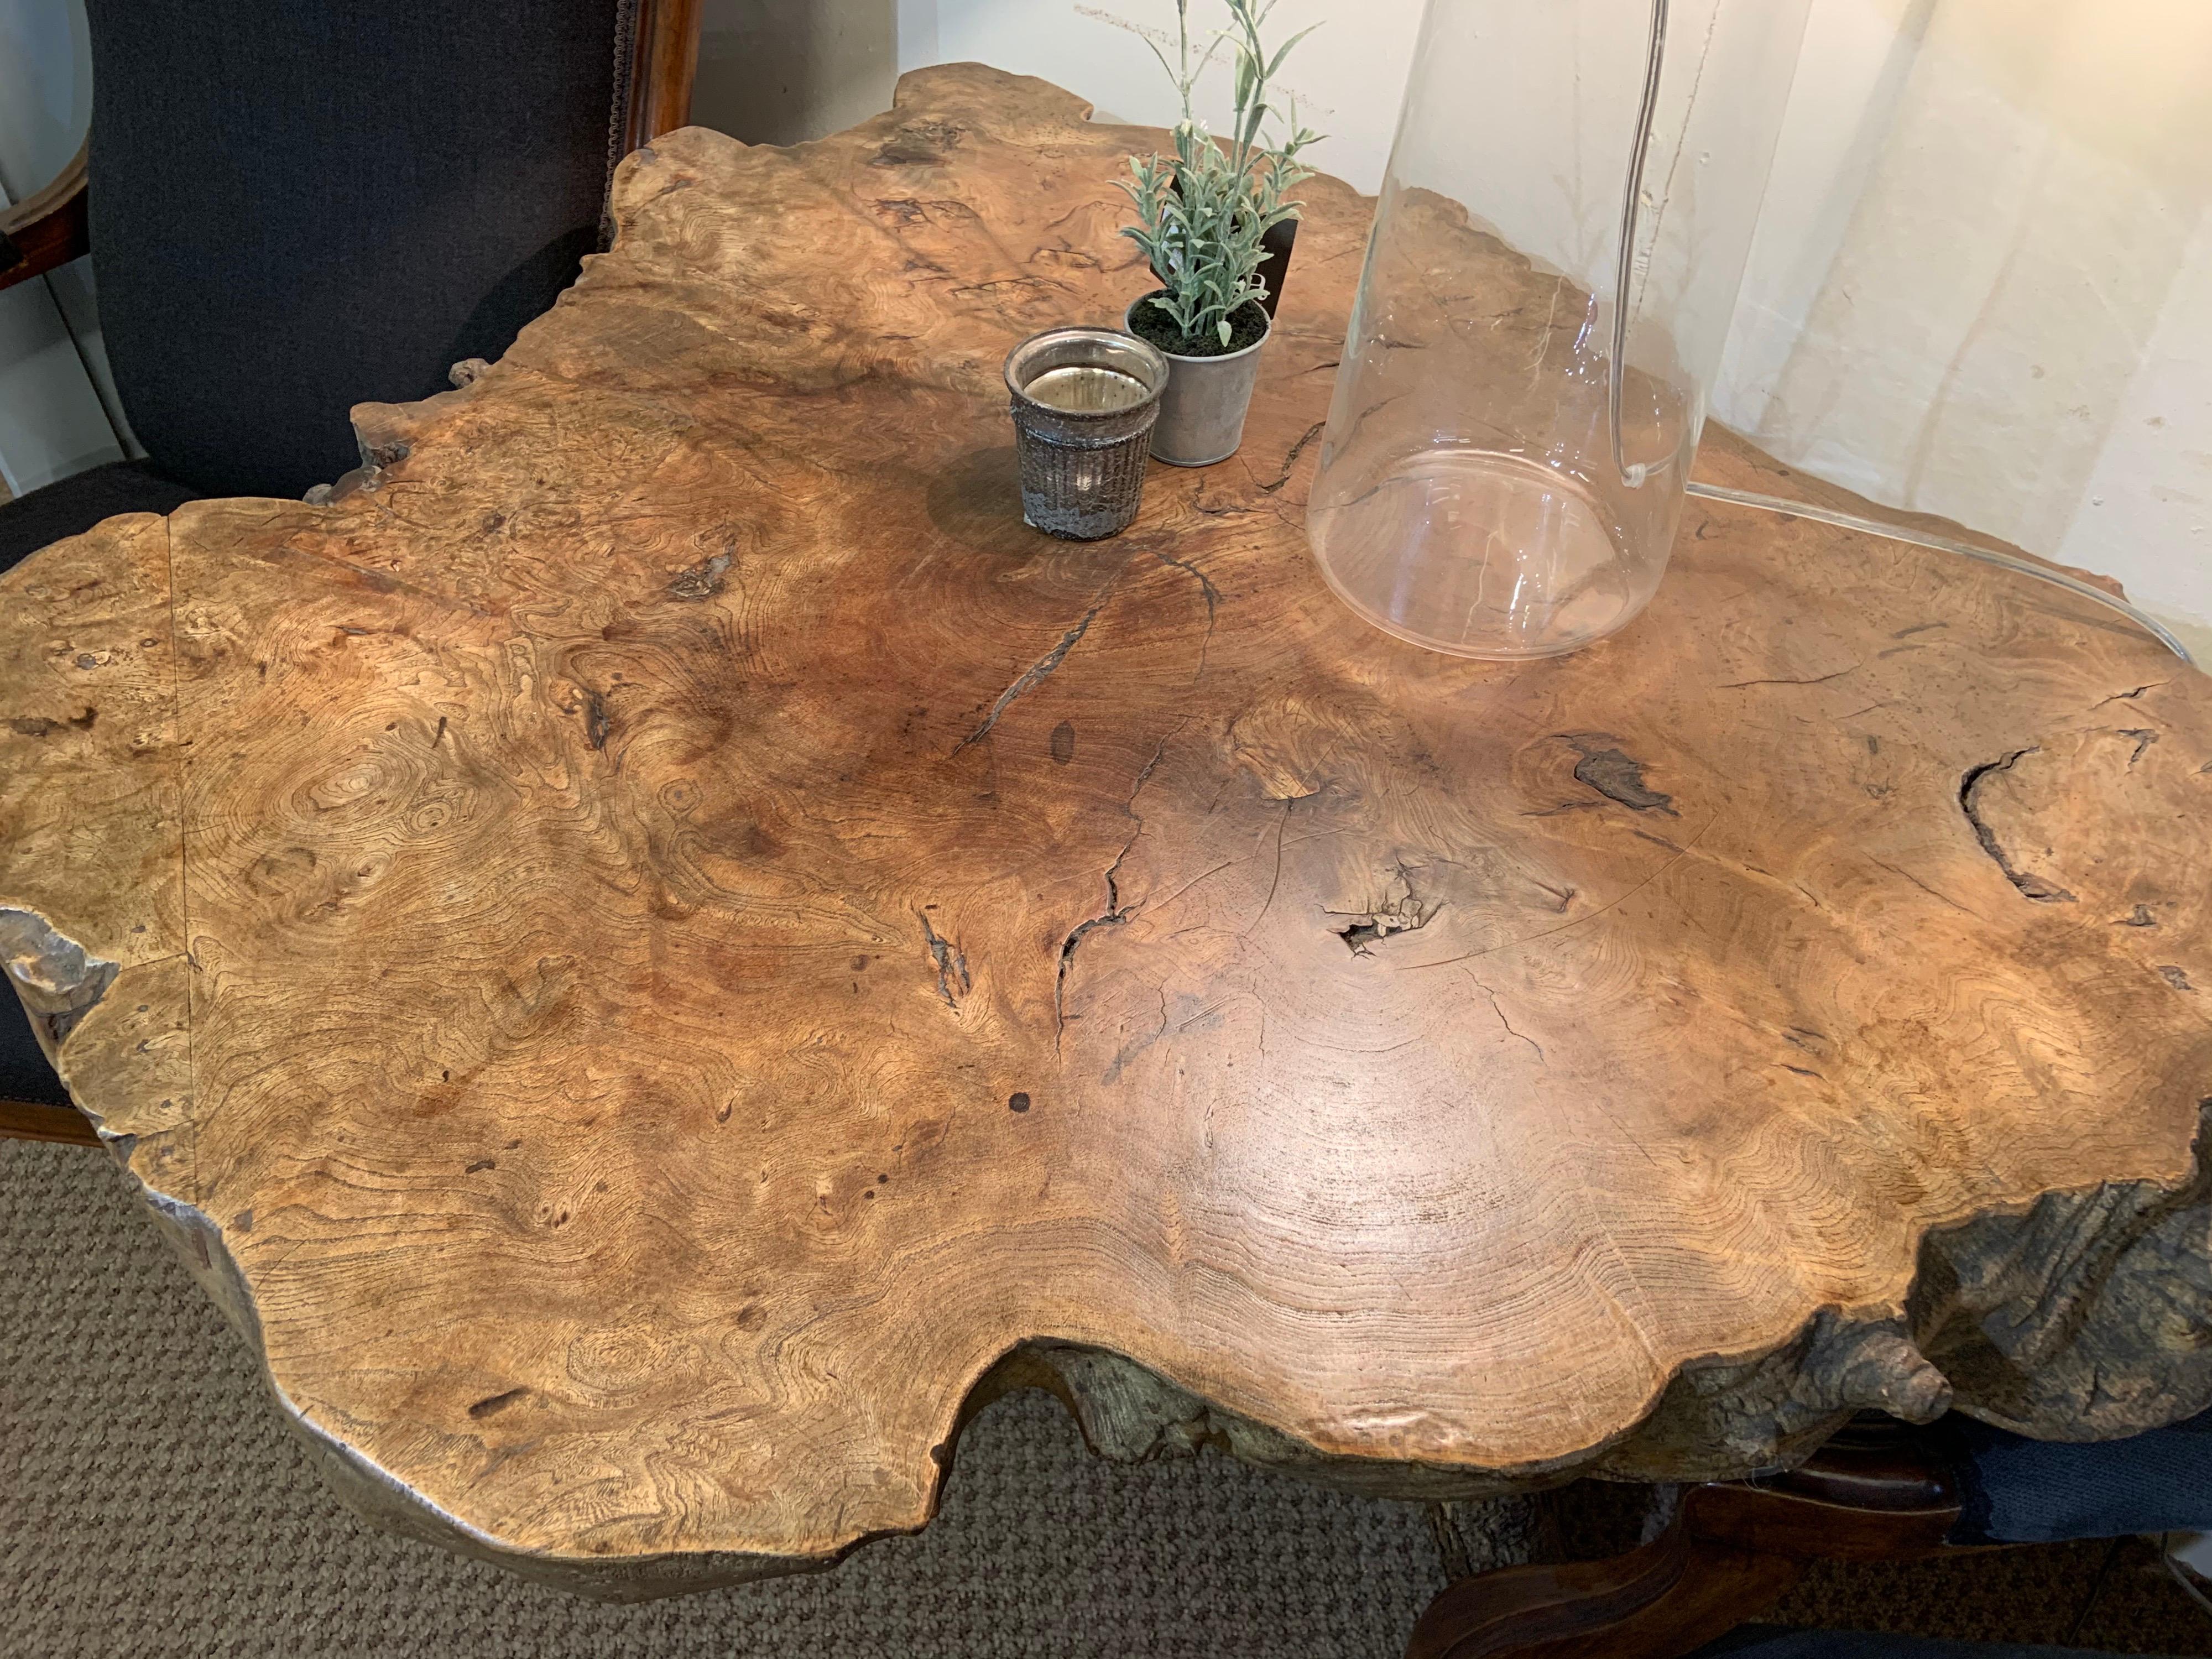 Live edge elm table with exquisite top. Stands on three leg trunk. Absolutely stunning table with a lot of character.